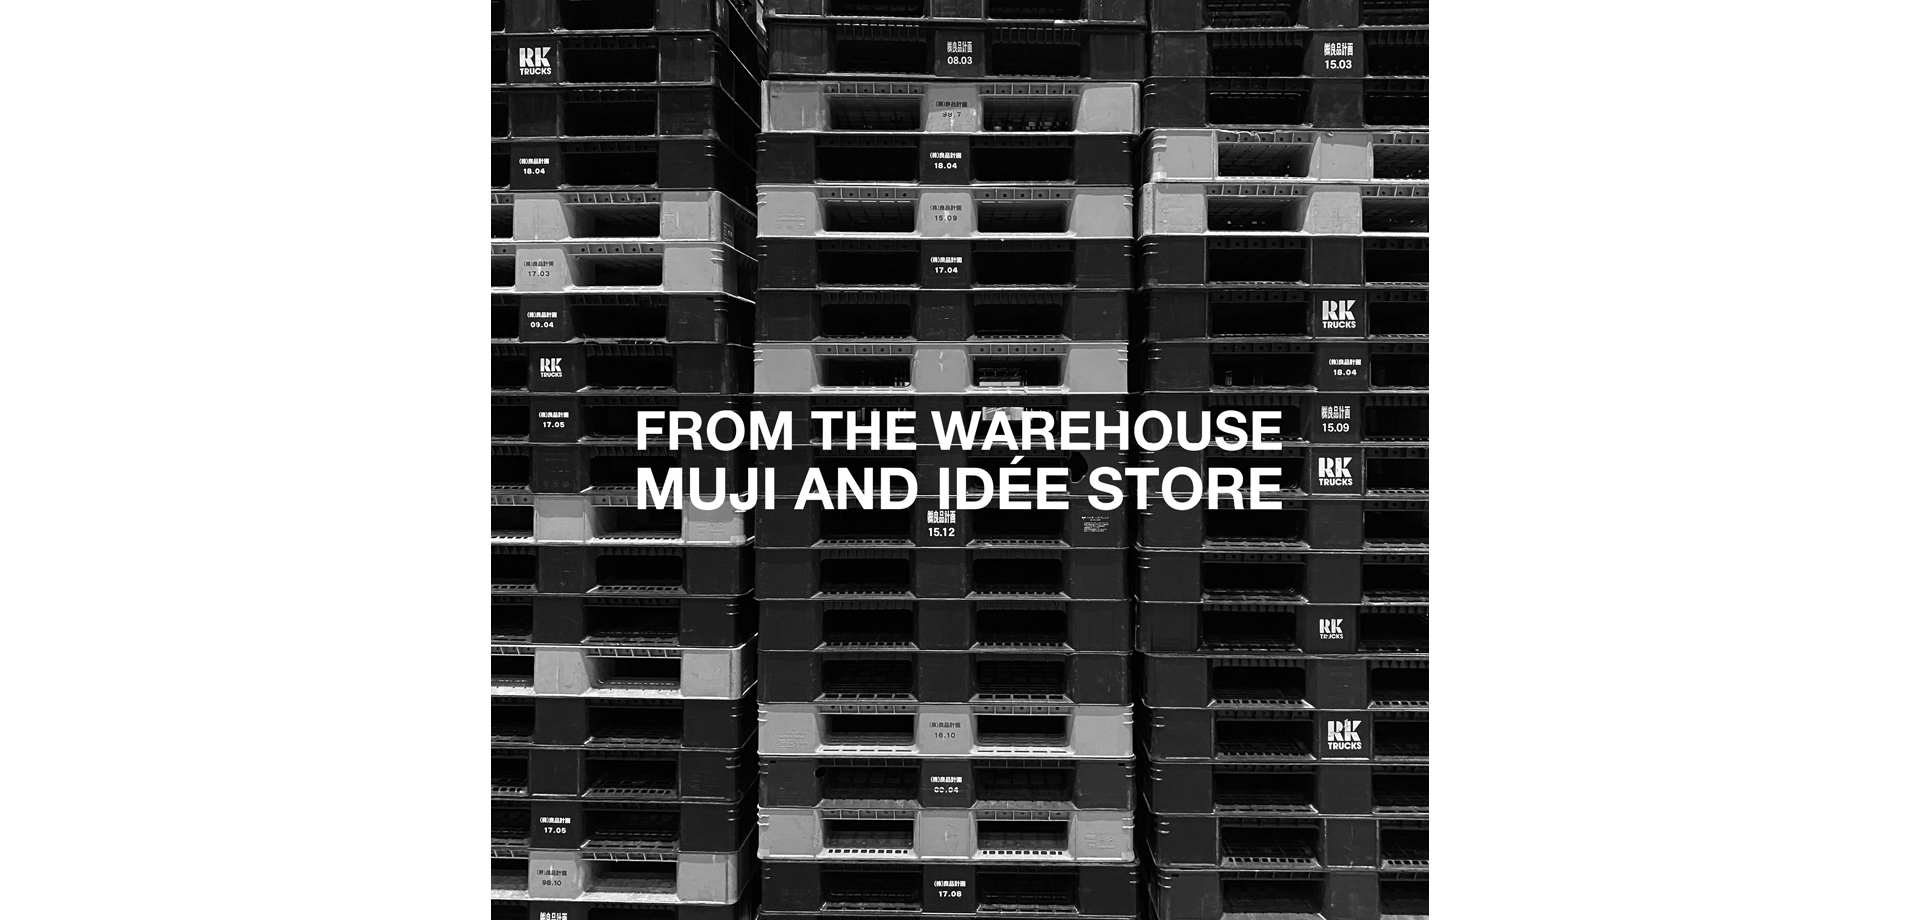 FROM THE WAREHOUSE MUJI AND IDEE STORE